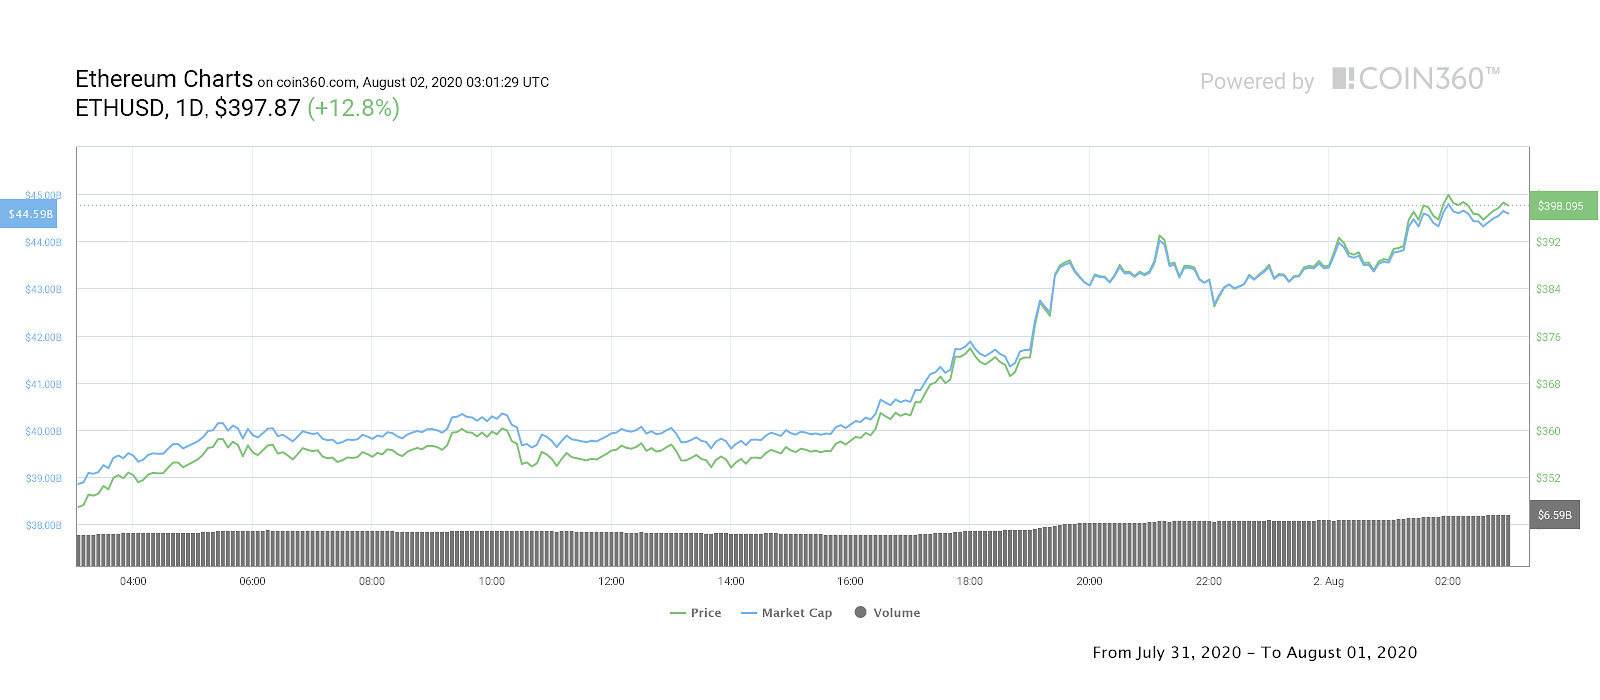 Ethereum daily price chart. Source: Coin360